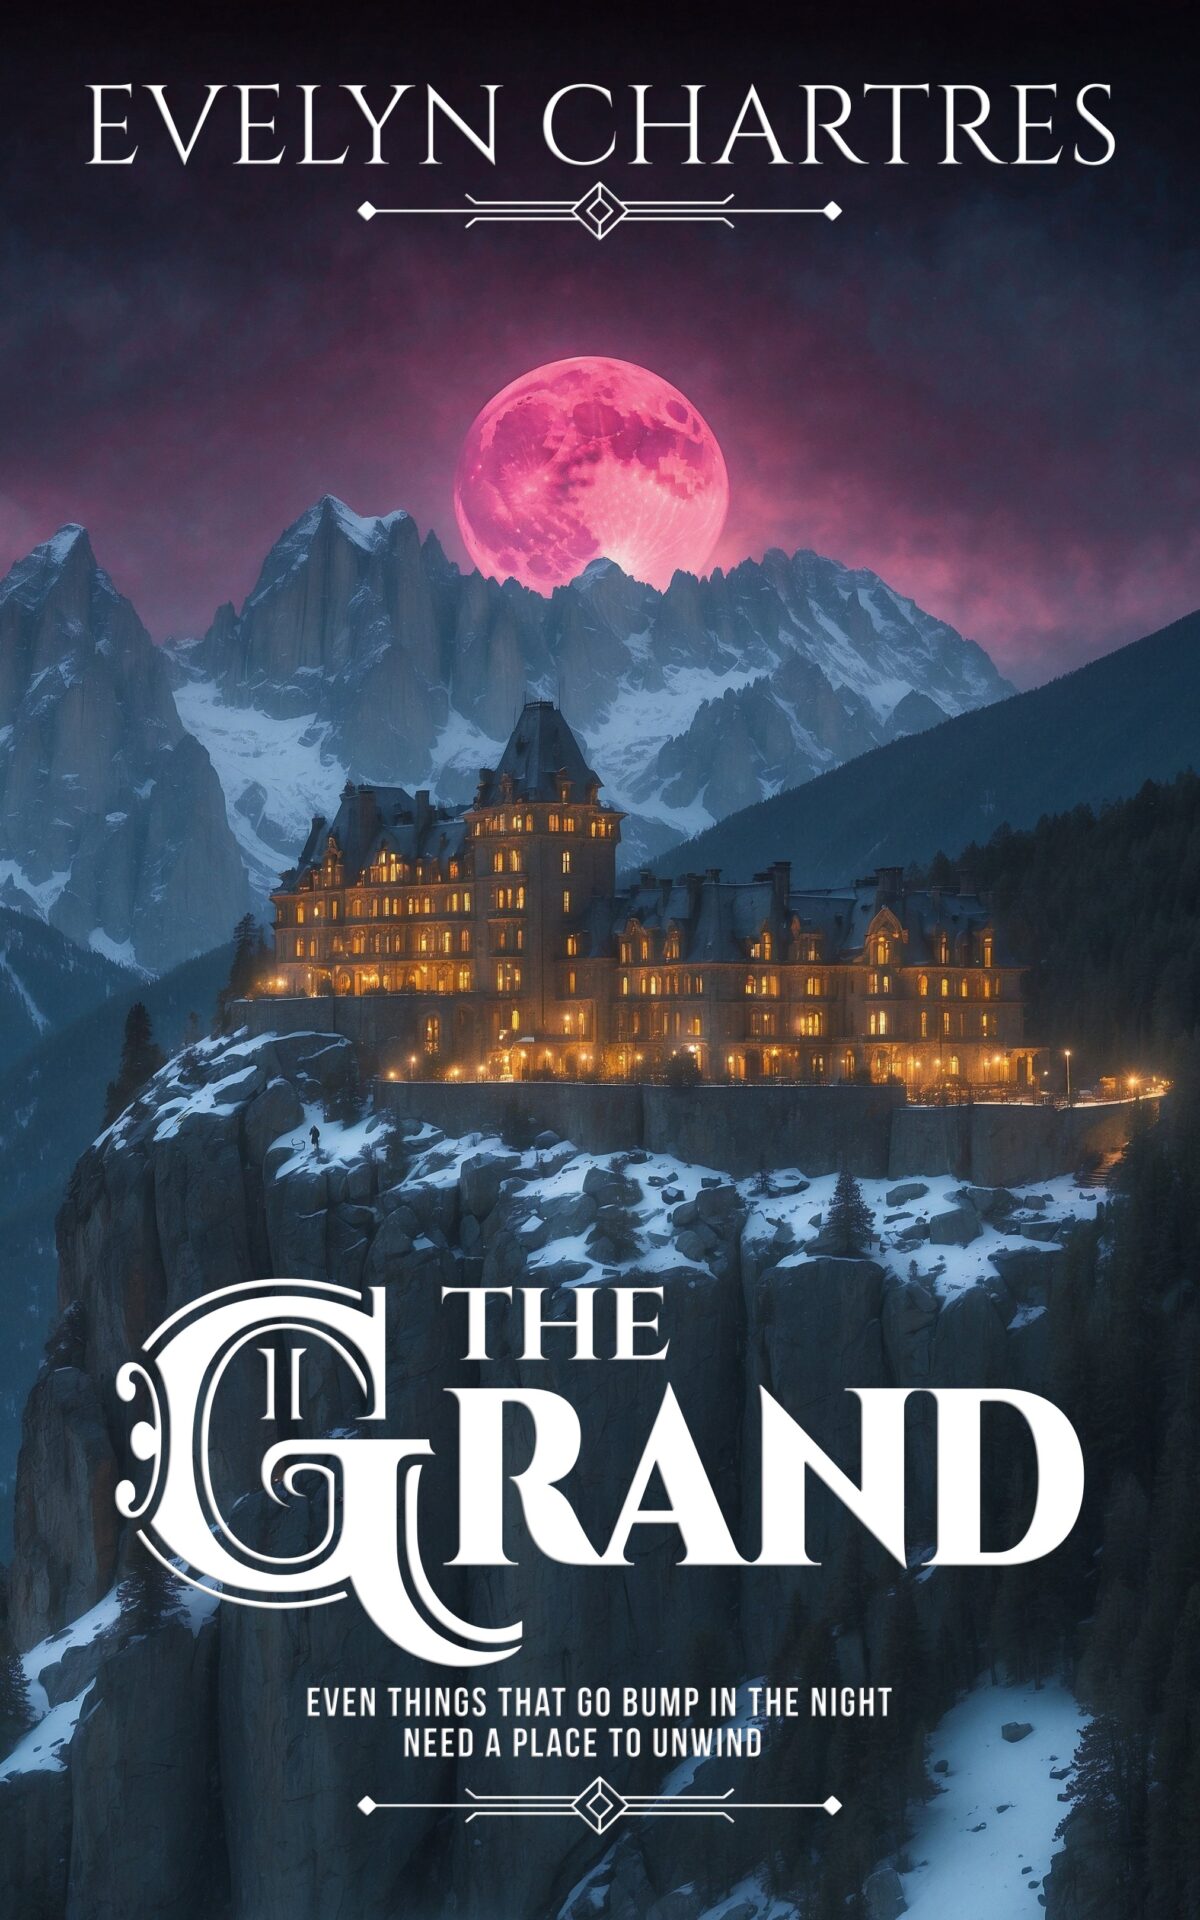 Cover for The Grand by Evelyn Chartres